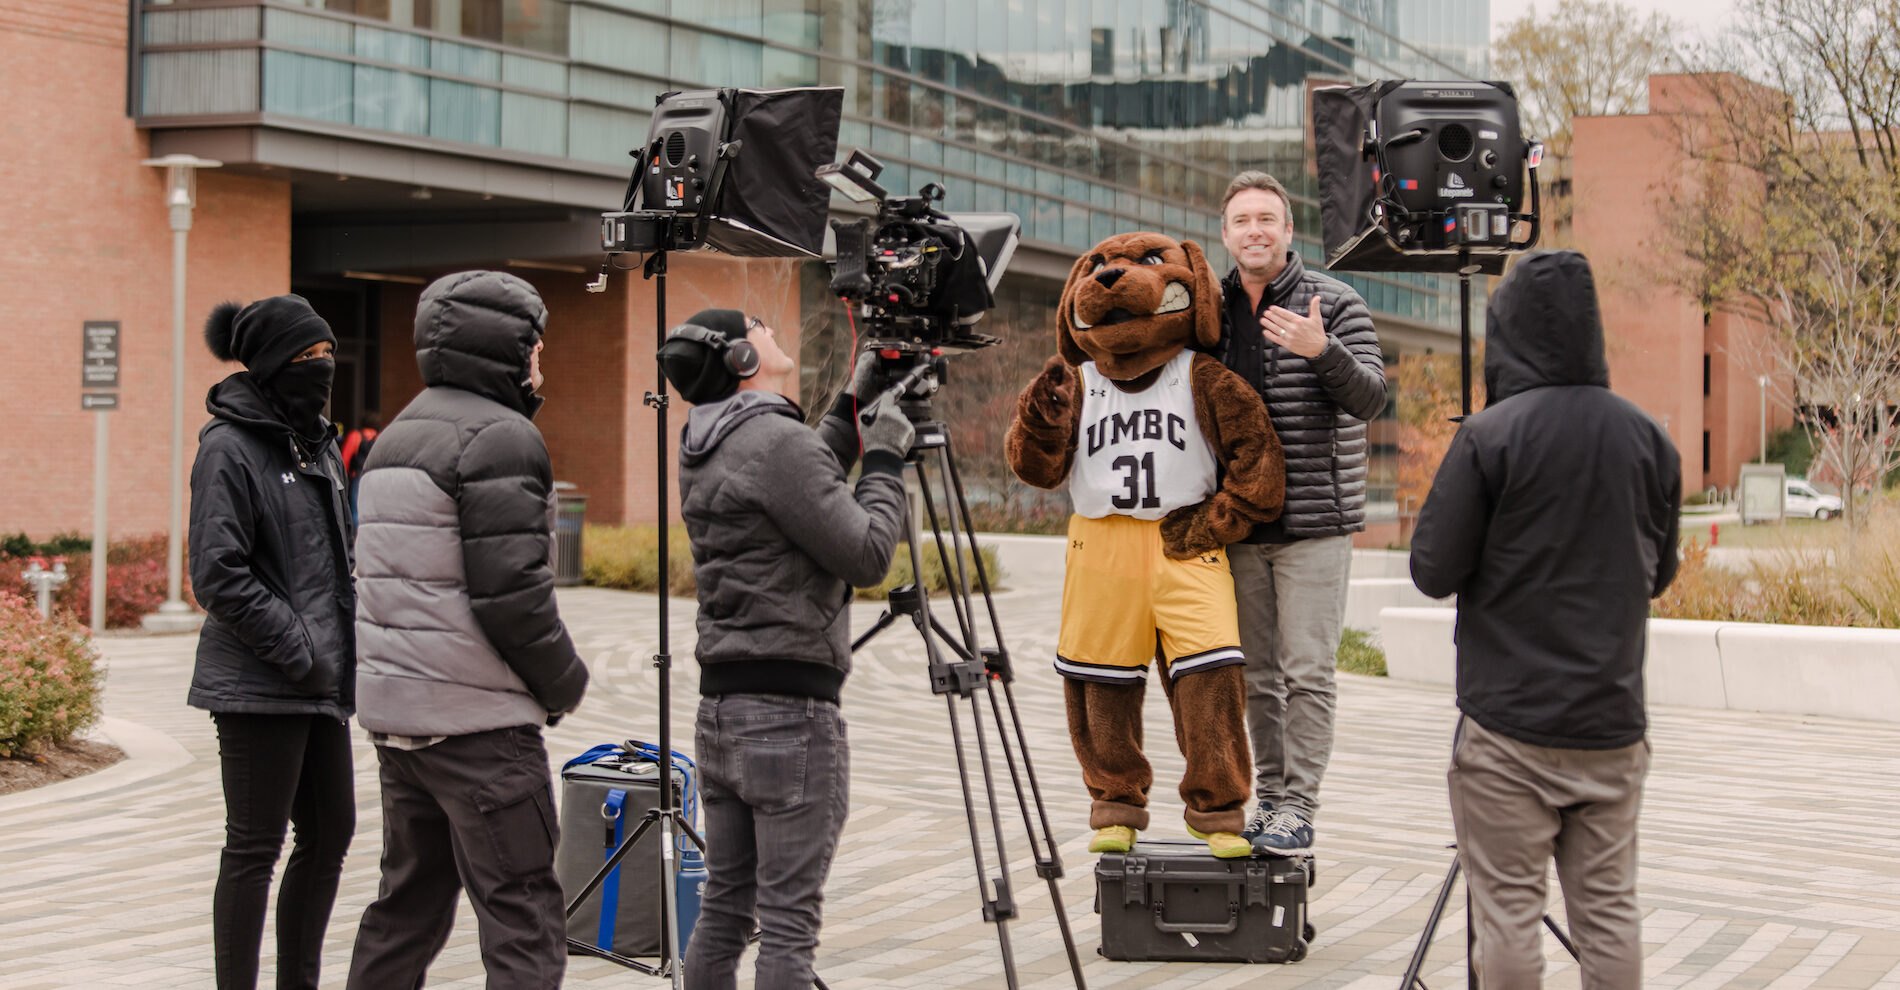 The College Tour host Alex Boylan poses in front of the camera with UMBC's mascot, True Grit in full retriever costume.